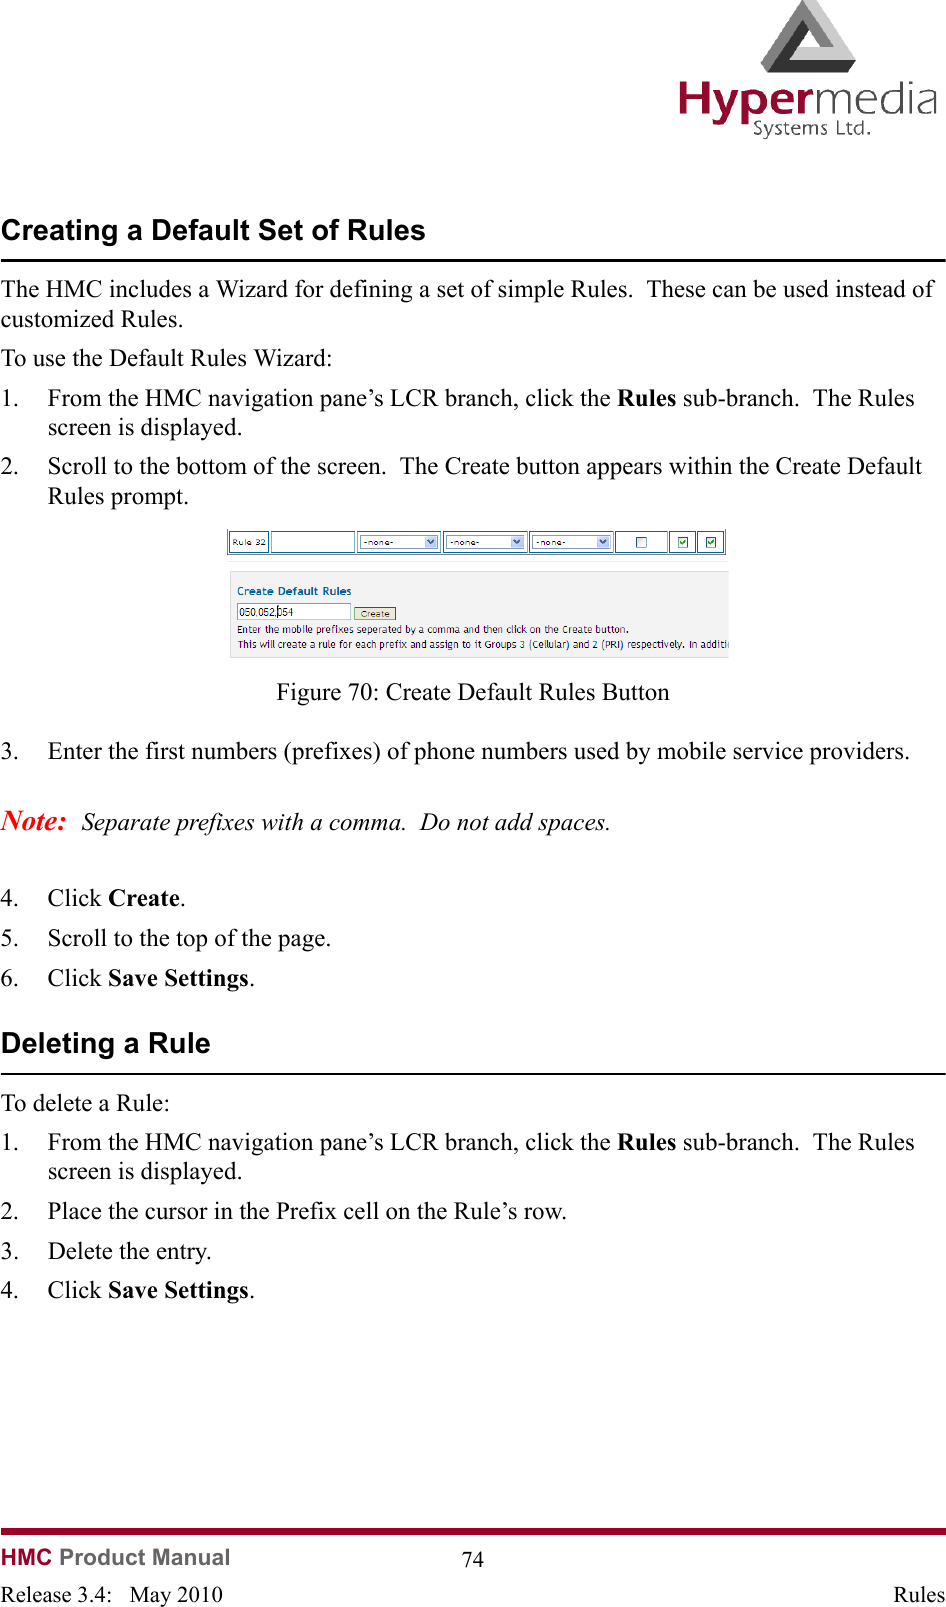   HMC Product Manual  74Release 3.4:   May 2010 RulesCreating a Default Set of RulesThe HMC includes a Wizard for defining a set of simple Rules.  These can be used instead of customized Rules.To use the Default Rules Wizard:1. From the HMC navigation pane’s LCR branch, click the Rules sub-branch.  The Rules screen is displayed.2. Scroll to the bottom of the screen.  The Create button appears within the Create Default Rules prompt.              Figure 70: Create Default Rules Button3. Enter the first numbers (prefixes) of phone numbers used by mobile service providers.Note:  Separate prefixes with a comma.  Do not add spaces.4. Click Create.  5. Scroll to the top of the page.6. Click Save Settings.Deleting a RuleTo delete a Rule:1. From the HMC navigation pane’s LCR branch, click the Rules sub-branch.  The Rules screen is displayed.2. Place the cursor in the Prefix cell on the Rule’s row.3. Delete the entry.4. Click Save Settings.